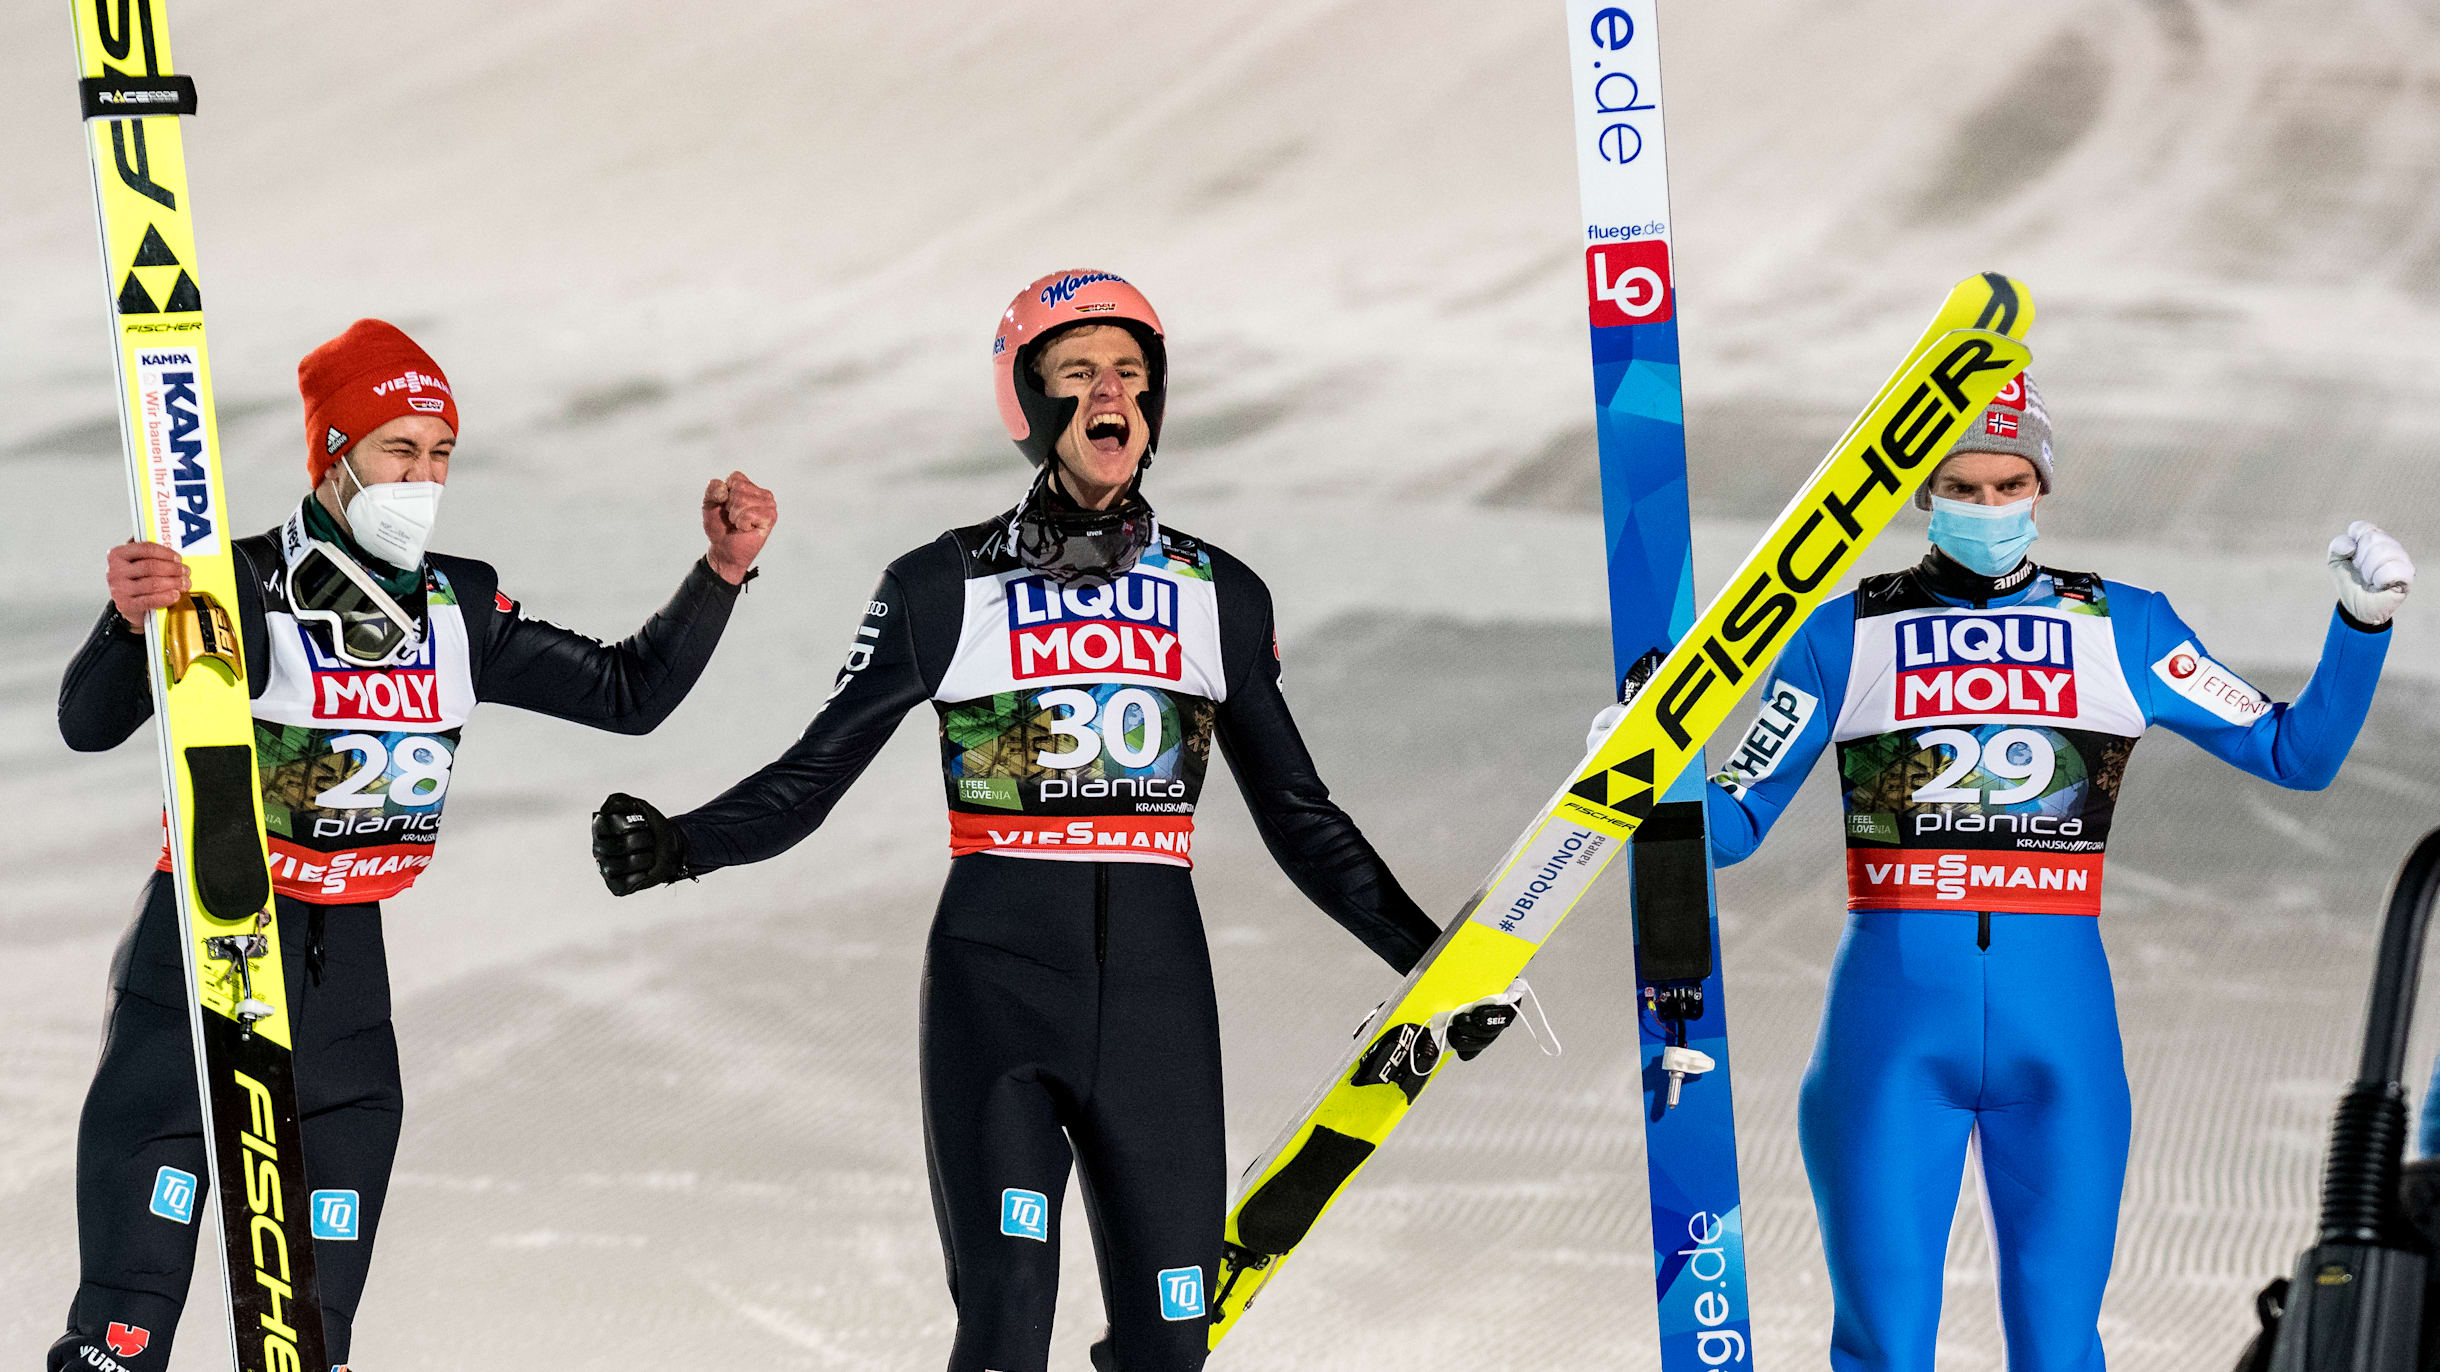 Everything you need to know about the 2022 Ski Flying World Championships